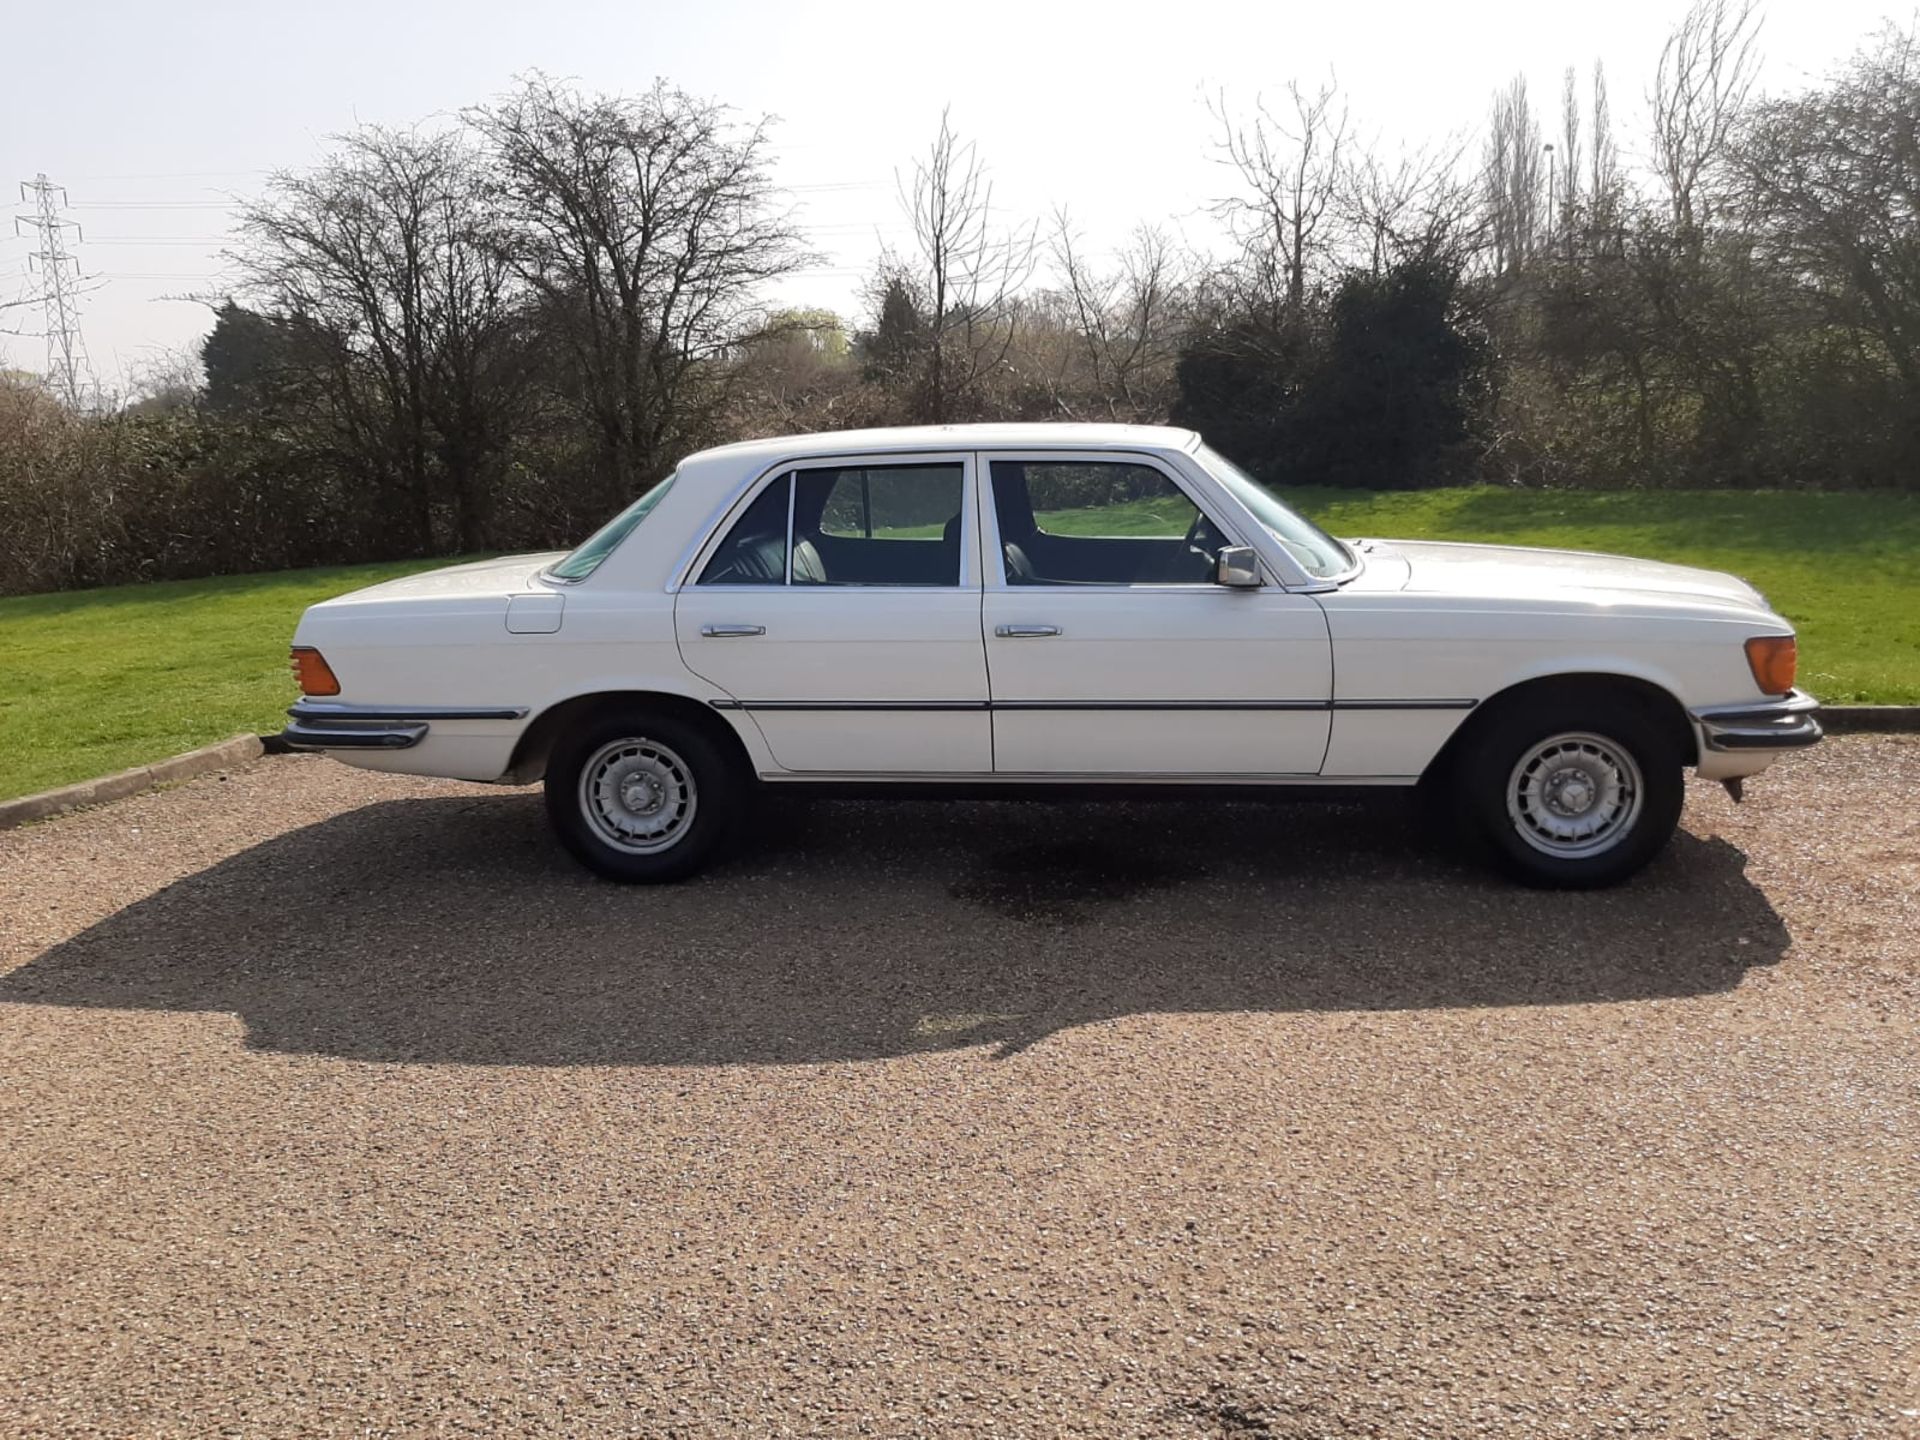 1980 Mercedes 300 SD Turbo Diesel LHD - Image 15 of 23